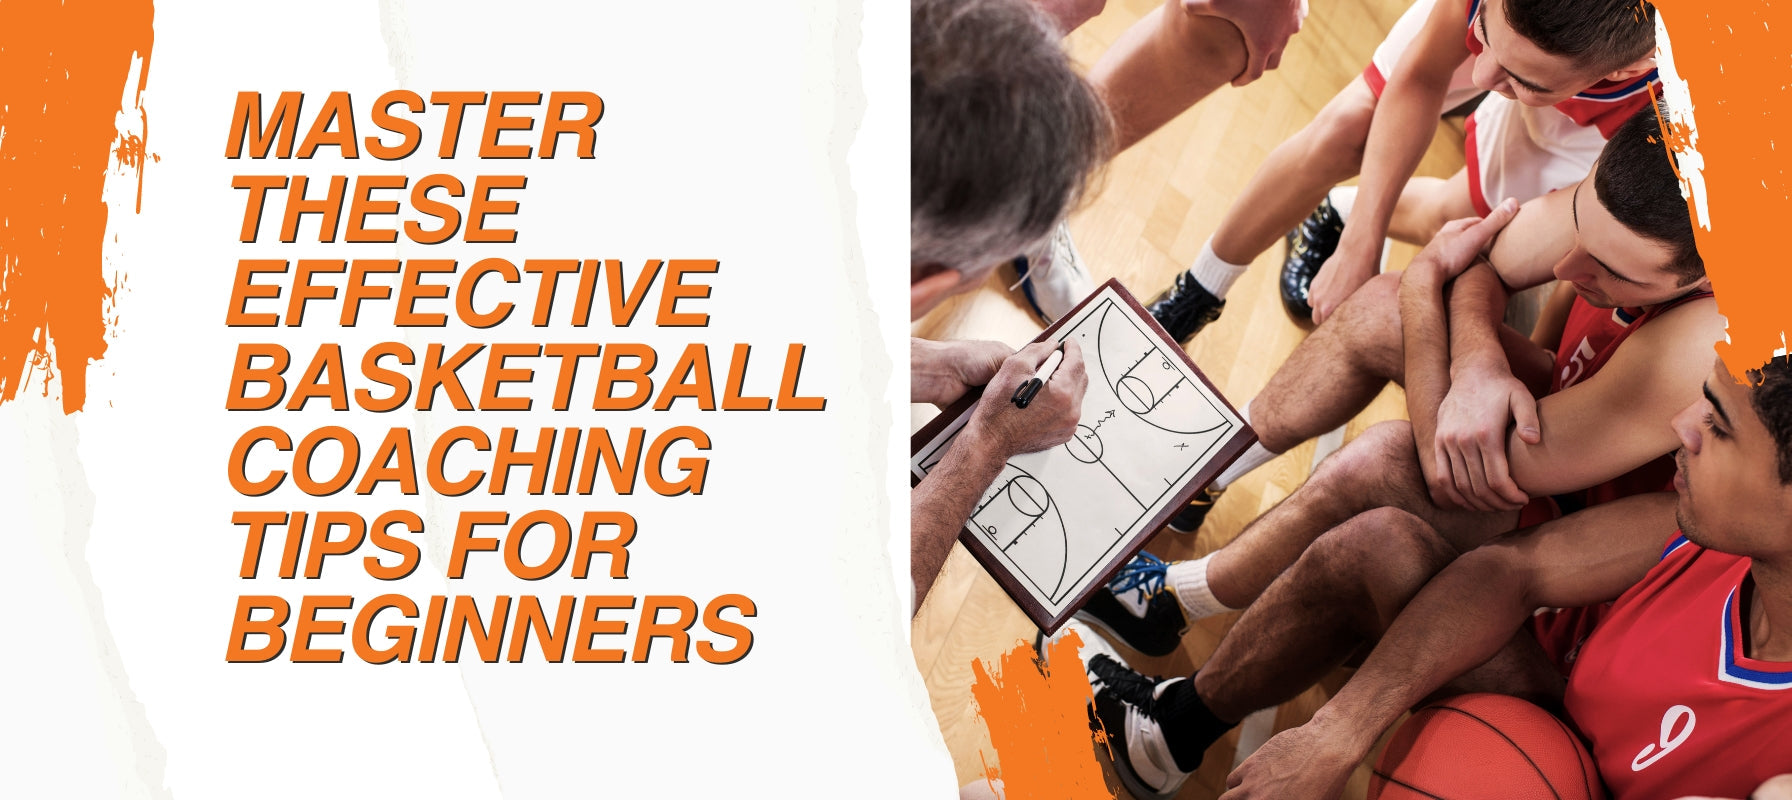 Basketball Coaching Tips for Beginners